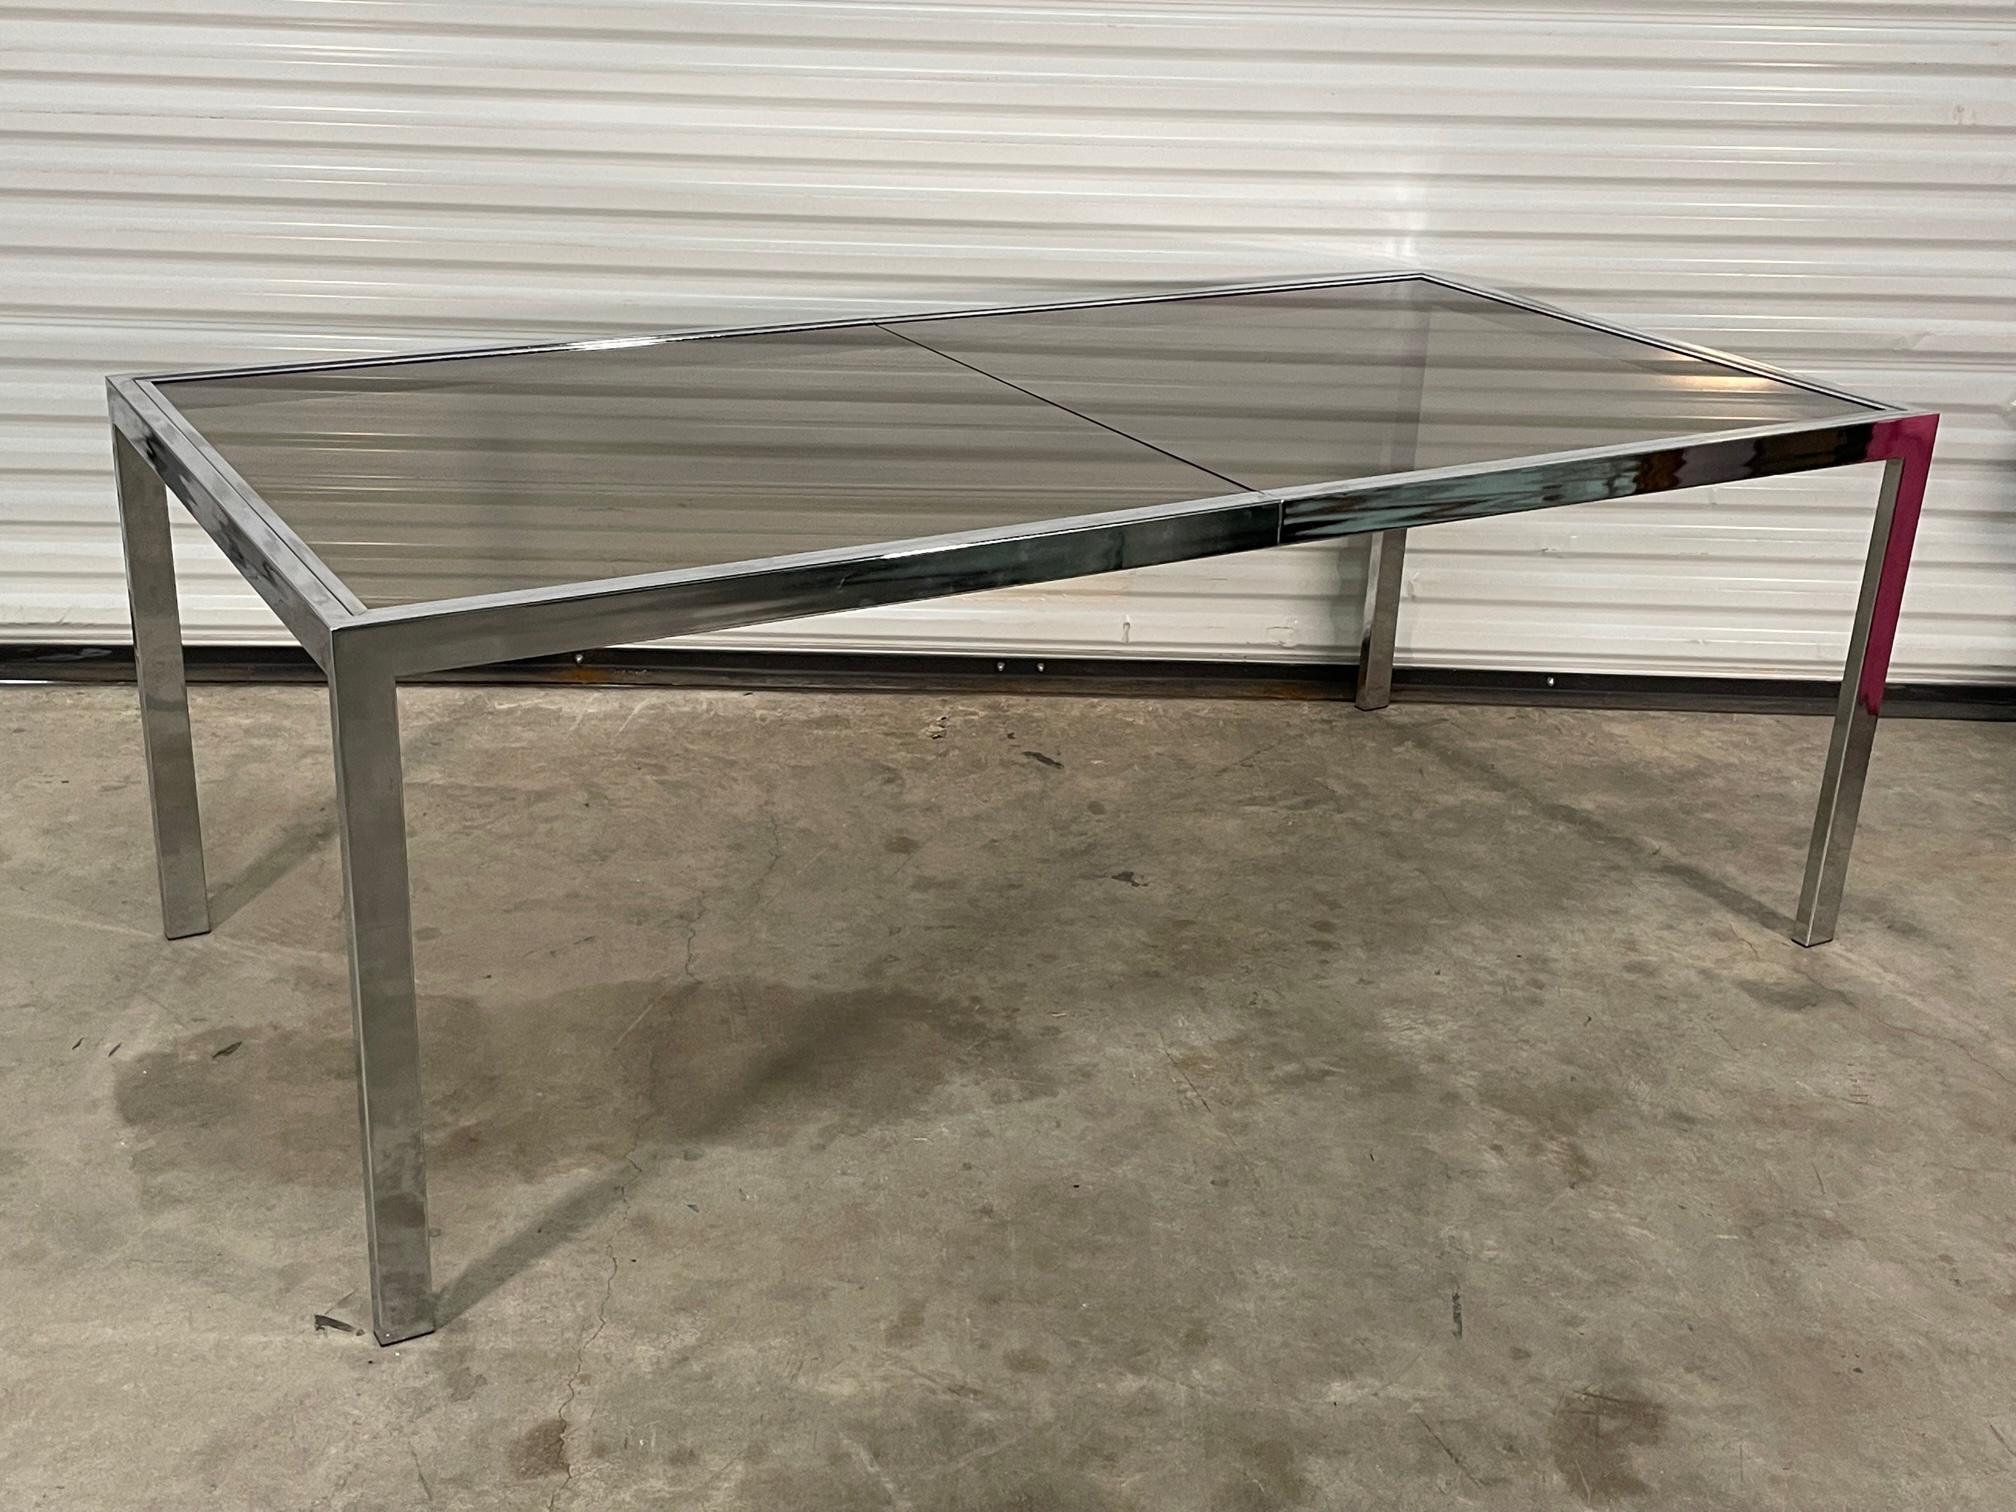 Mid century chrome dining table by Milo Baughman for Design Institute of America features smoked glass and a chrome frame. Good condition with imperfections consistent with age, see photos for condition details. We are also offering the matching